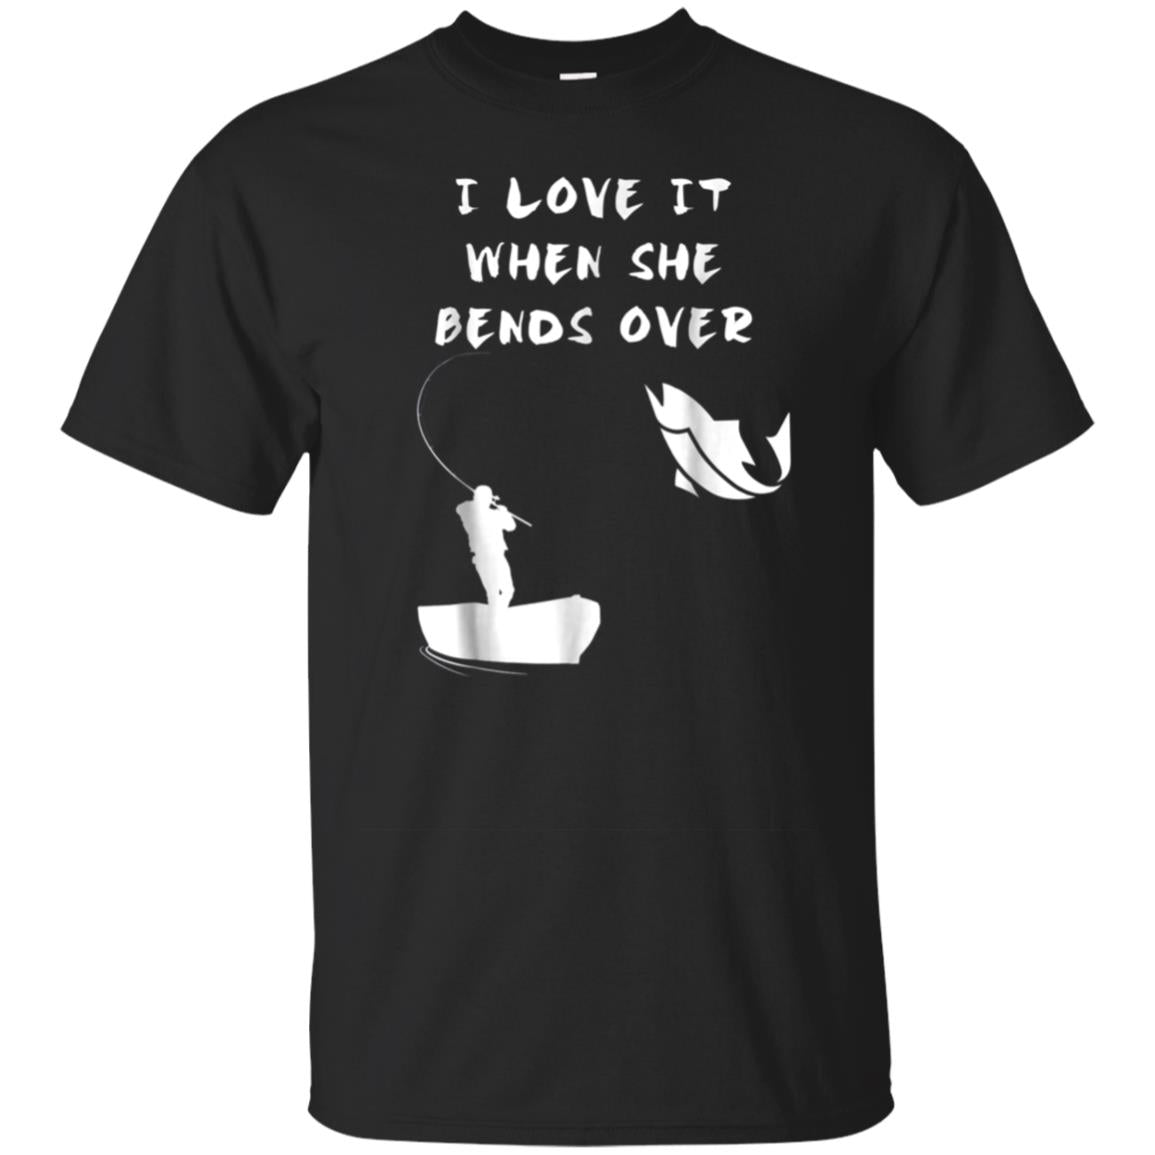 Funny Fishing Shirts I Love It When She Bends Over Apparel